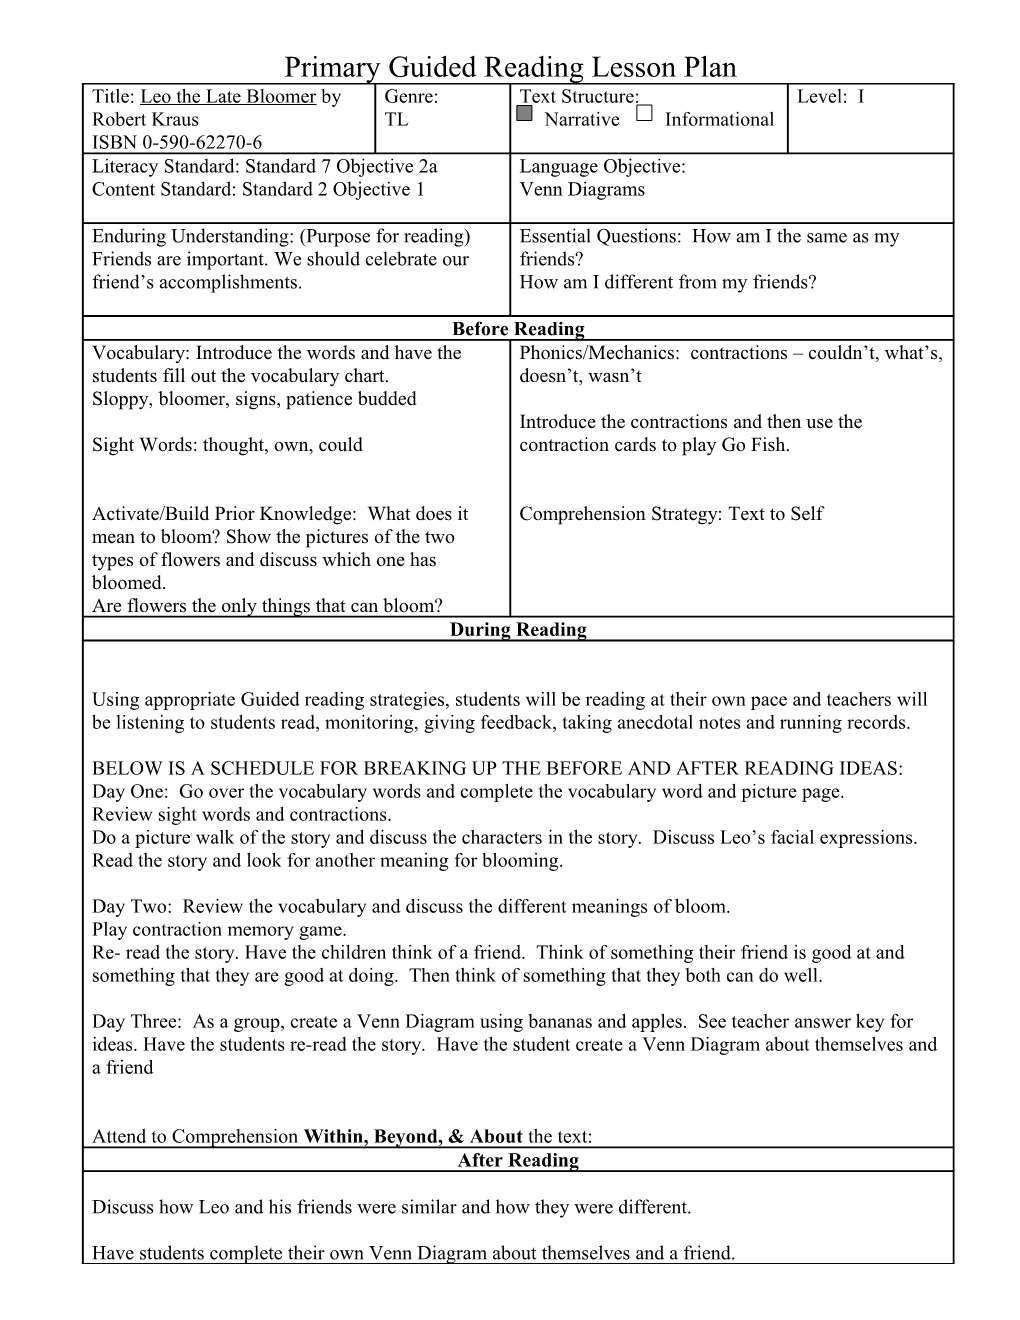 Primary Guided Reading Lesson Plan s1